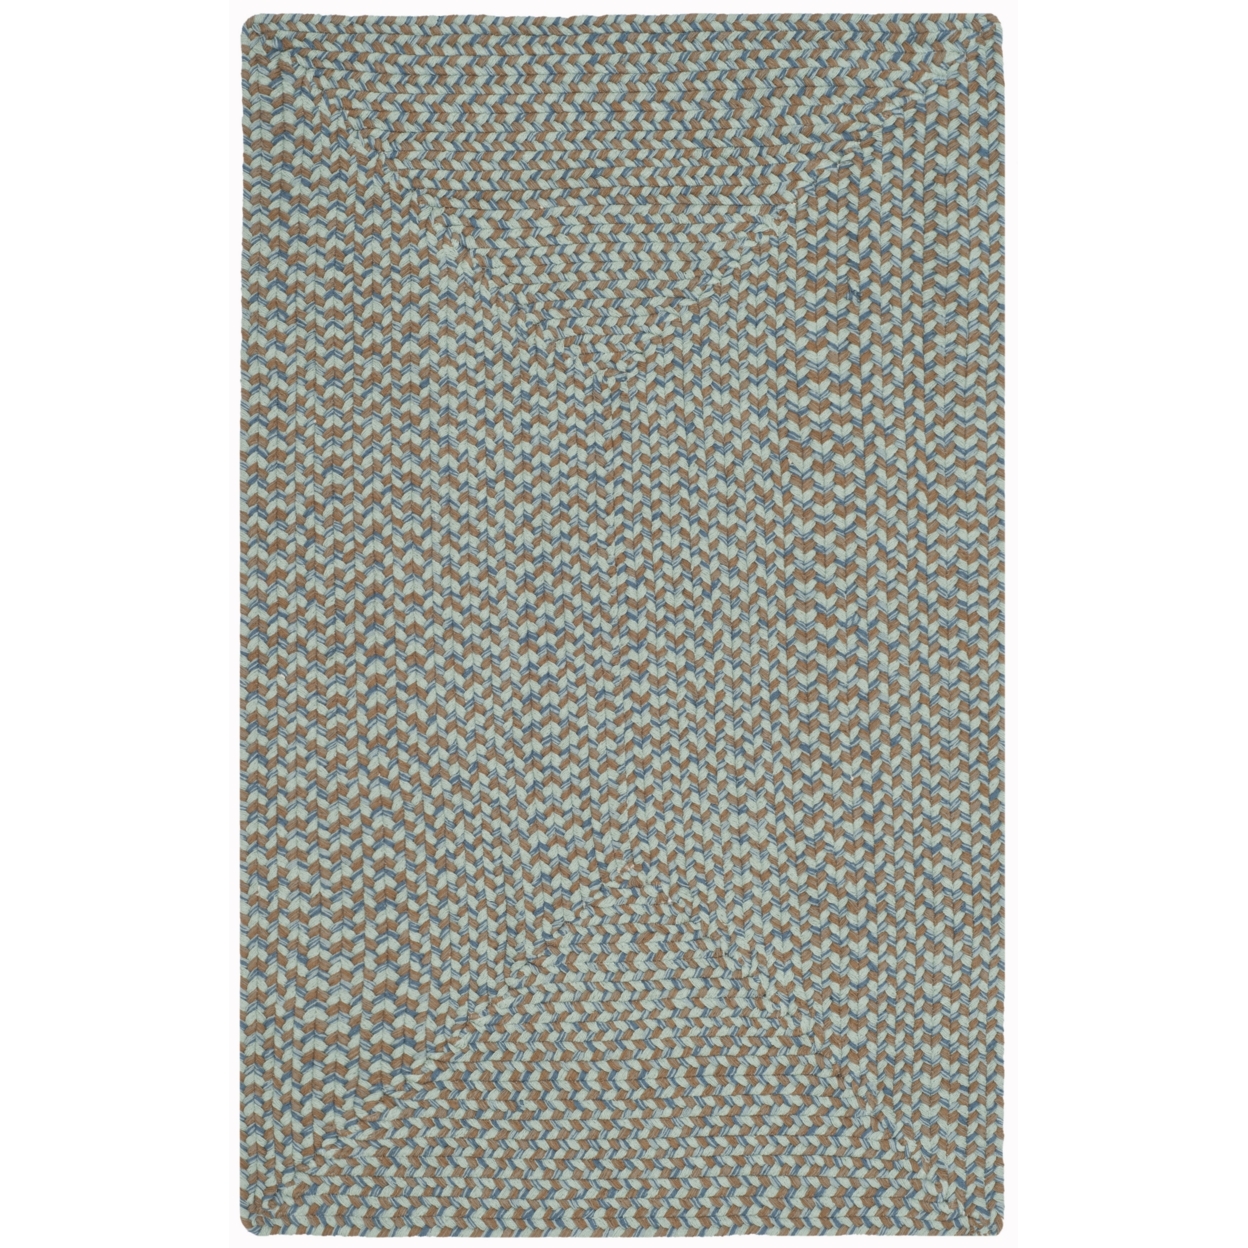 SAFAVIEH Braided Collection BRD170A Handwoven Multi Rug - 8' X 10'